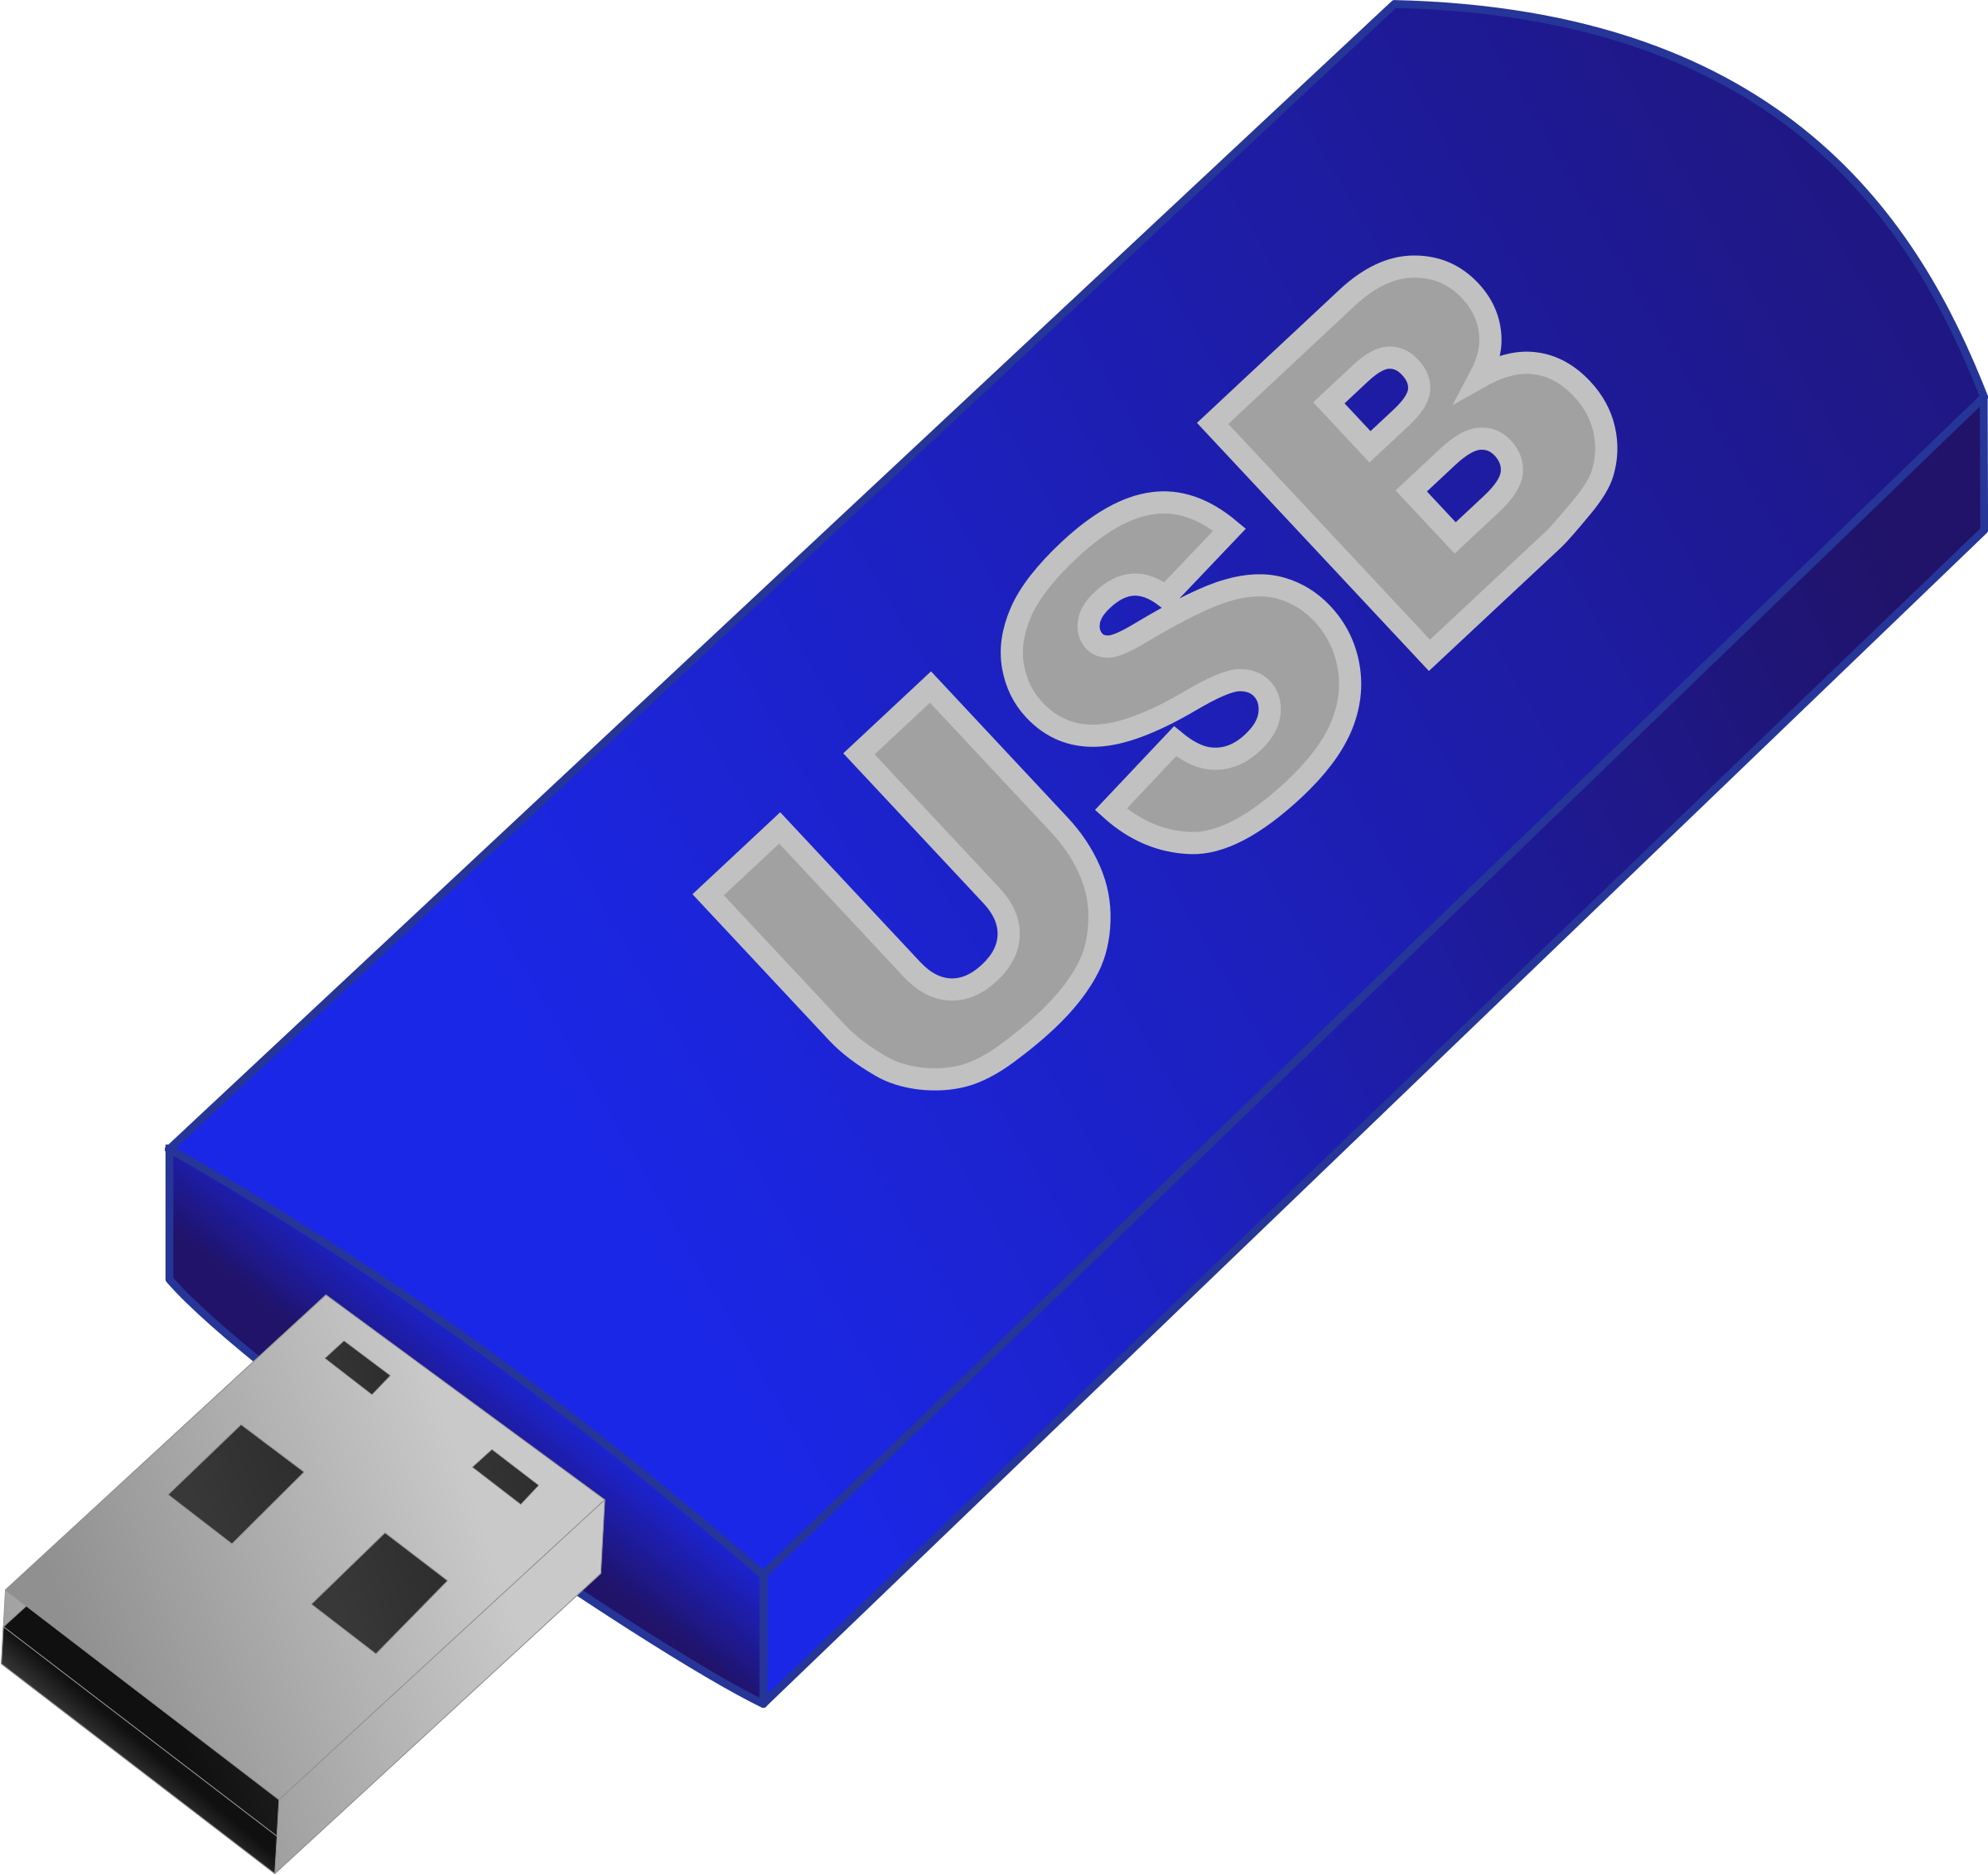 This Free Icons Png Design Of Usb Pendrive - Recovery Software Recover Undelete Lost Files Music (2400x2264)